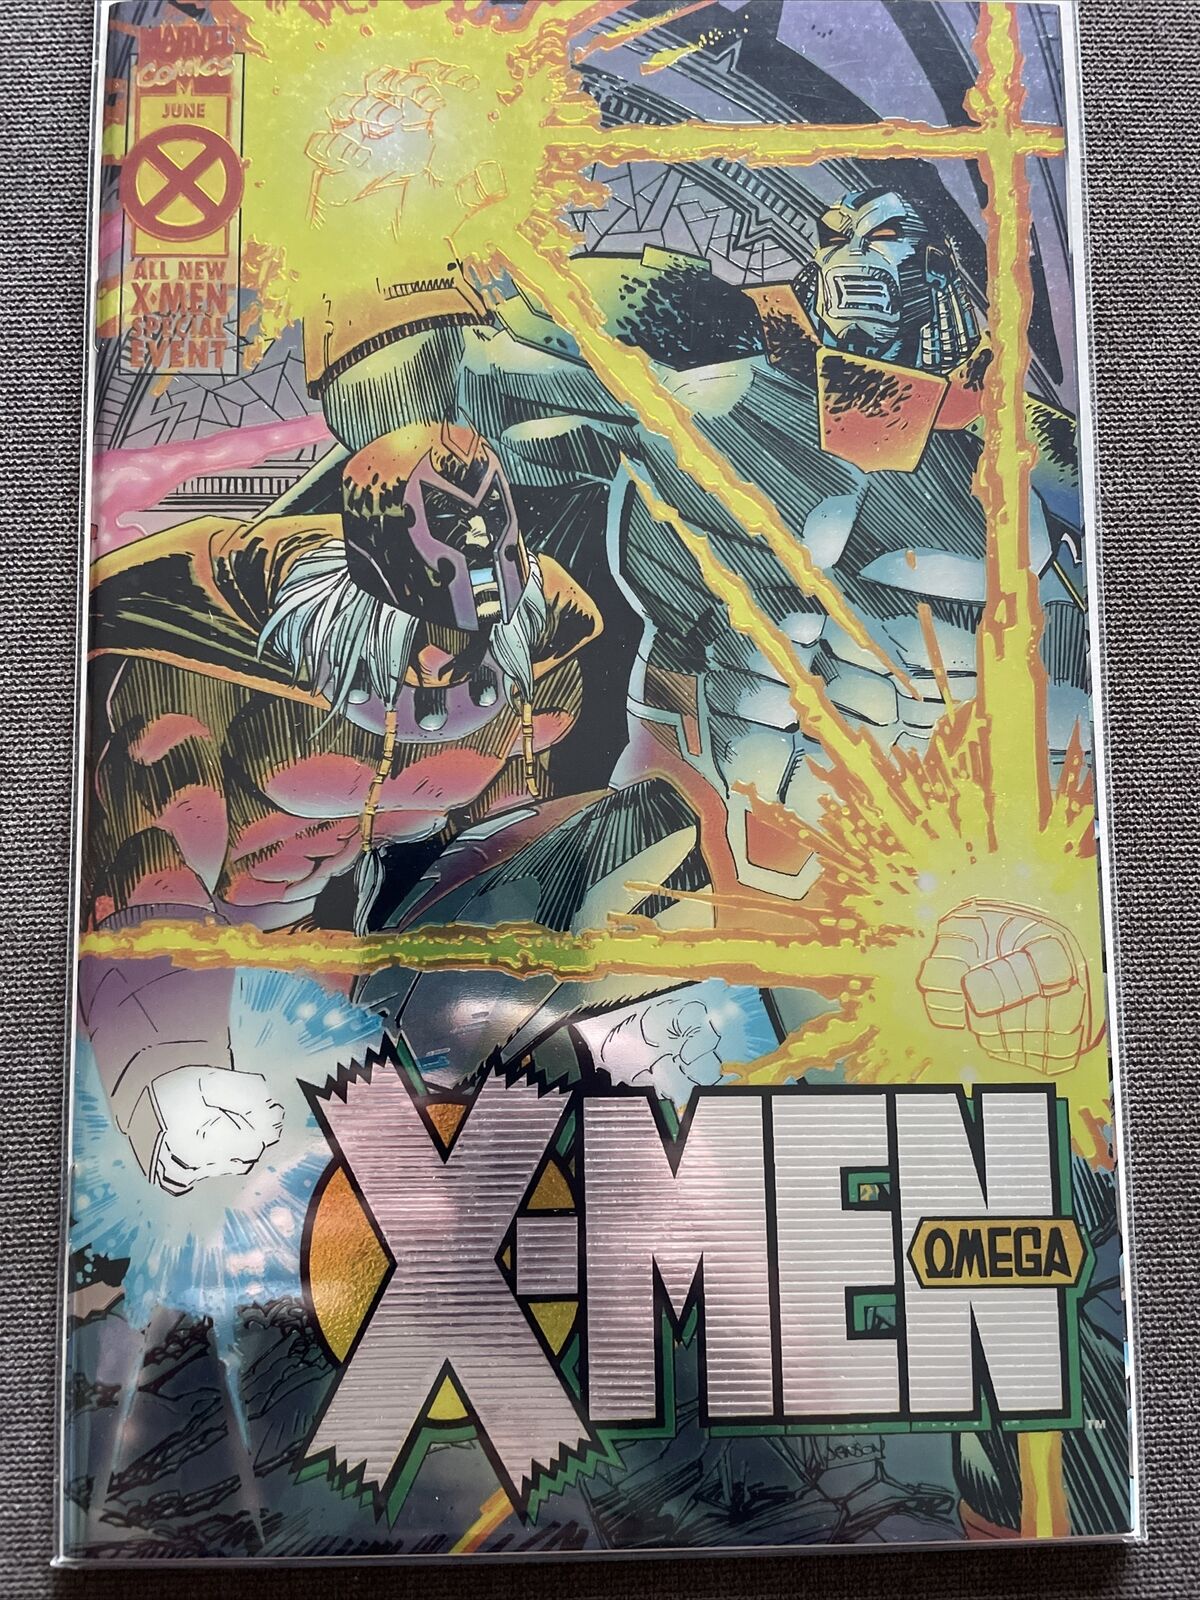 Marvel - X-MEN OMEGA #1 (Great Condition) bagged and boarded